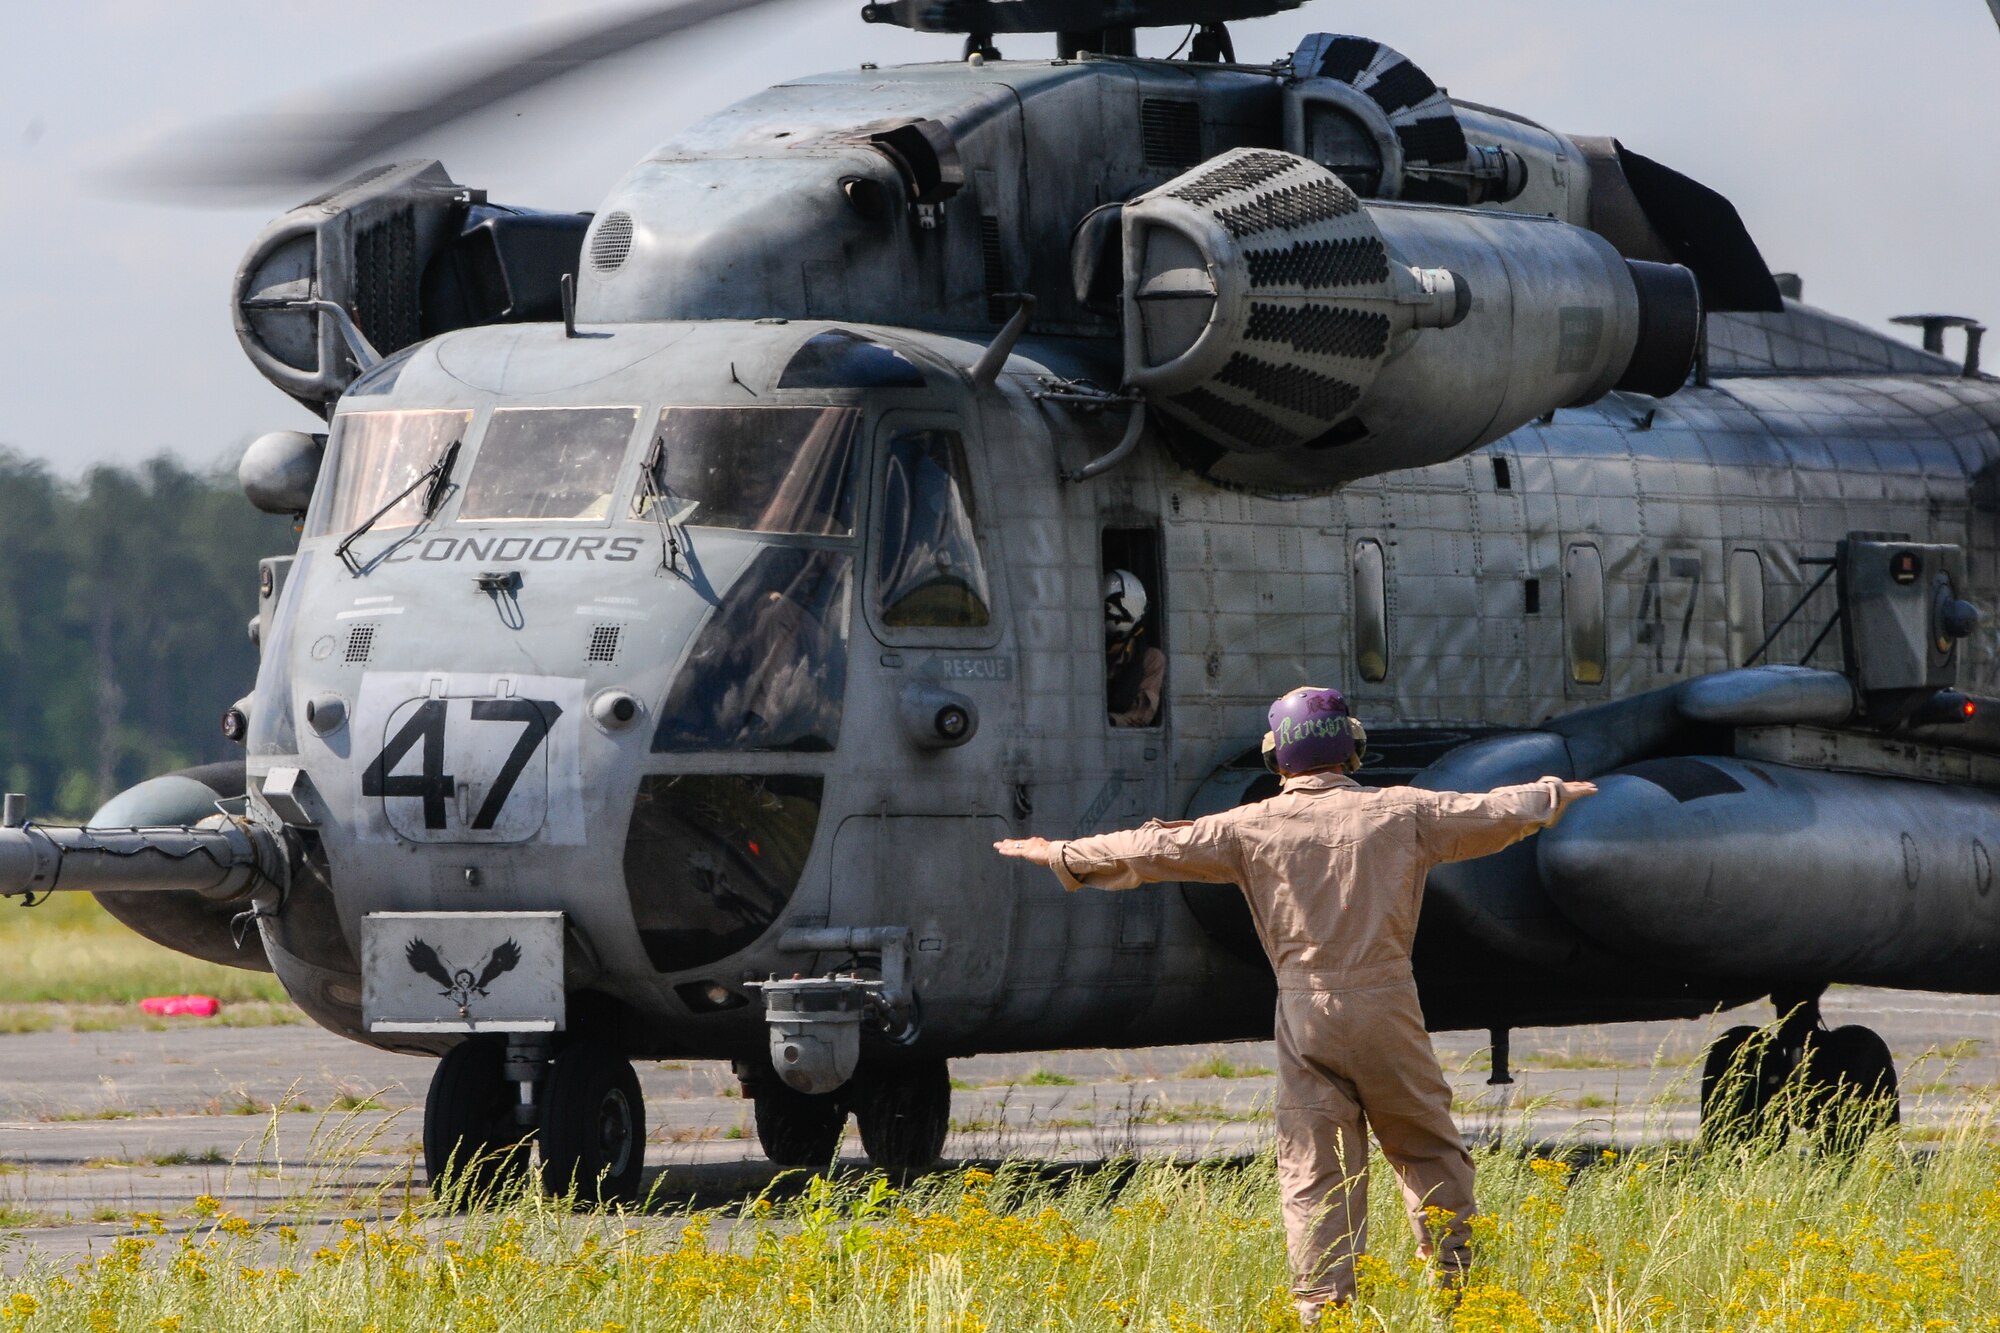 A U.S. Marine assigned to the 273rd Marine Wing Support Squadron, Air Operations Company, marshals a CH-53 Sea Stallion during forward air refueling point operations at McEntire Joint National Guard Base, S.C. on May 14, 2014. Elements of the South Carolina Air and Army National Guard and the U.S. Marines conduct joint operations which are crucial to the ongoing success of operational readiness and deployments around the world.  (U.S. Air National Guard photo by Tech Sgt. Jorge Intriago/Released)